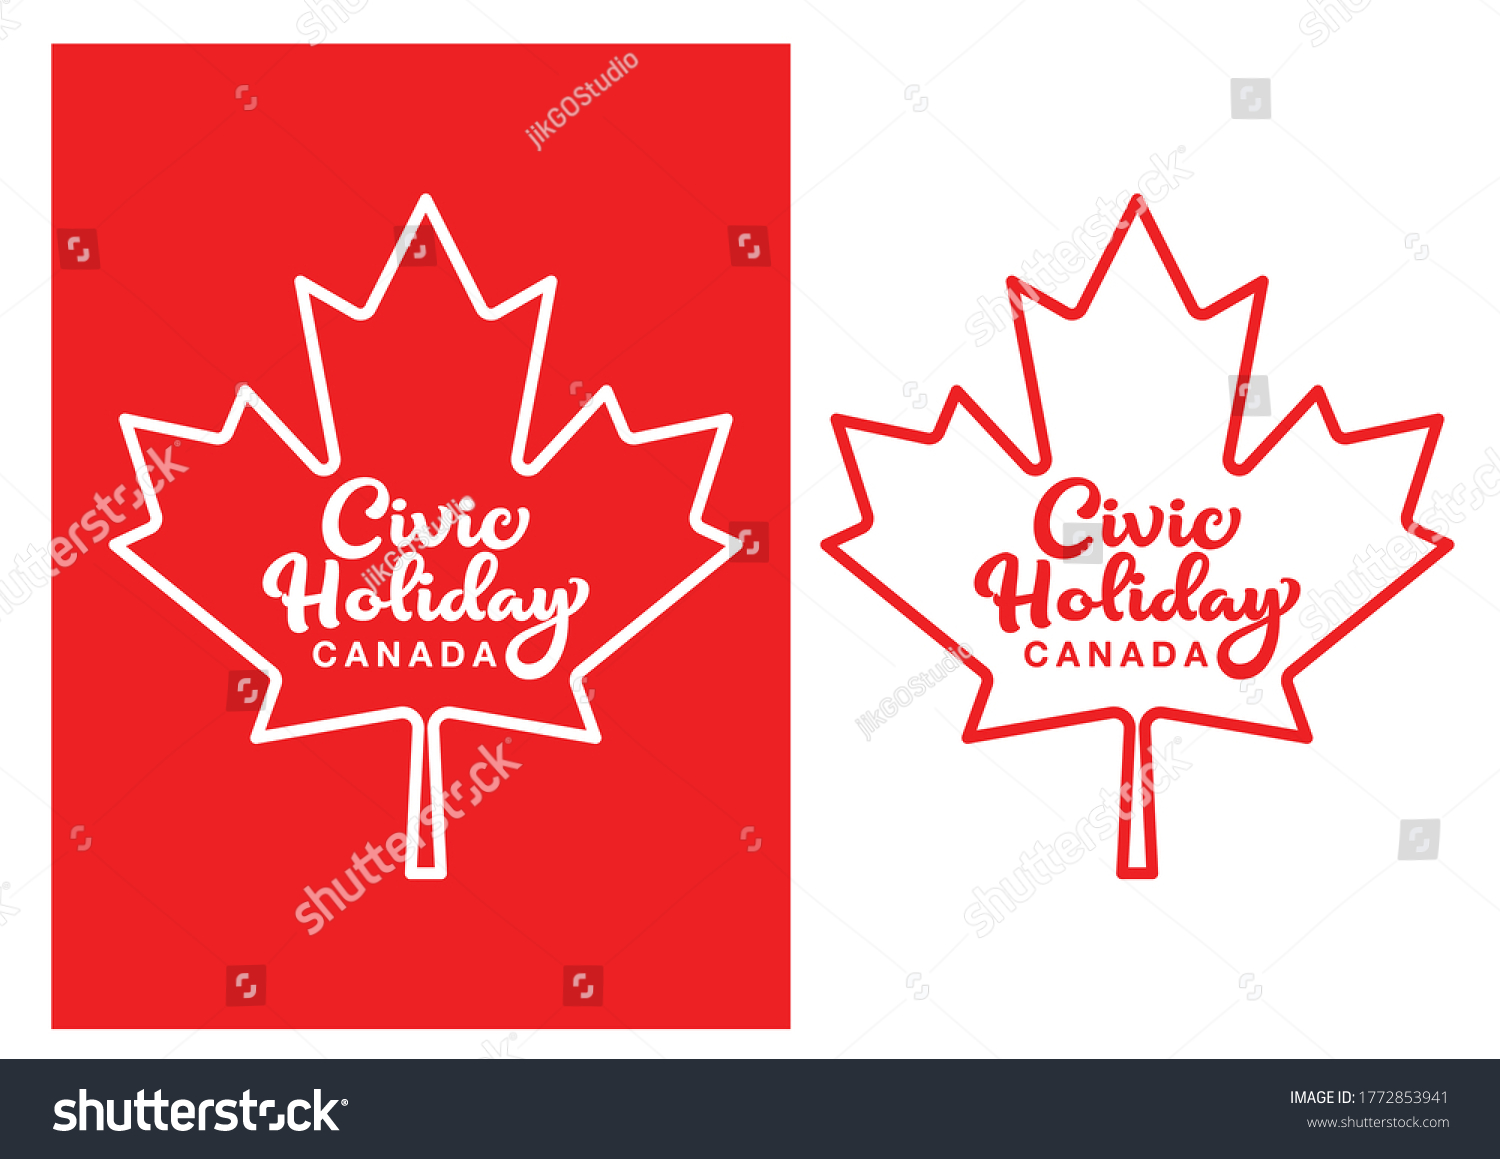 August Civic Holiday Canada Logo Design Stock Vector (Royalty Free